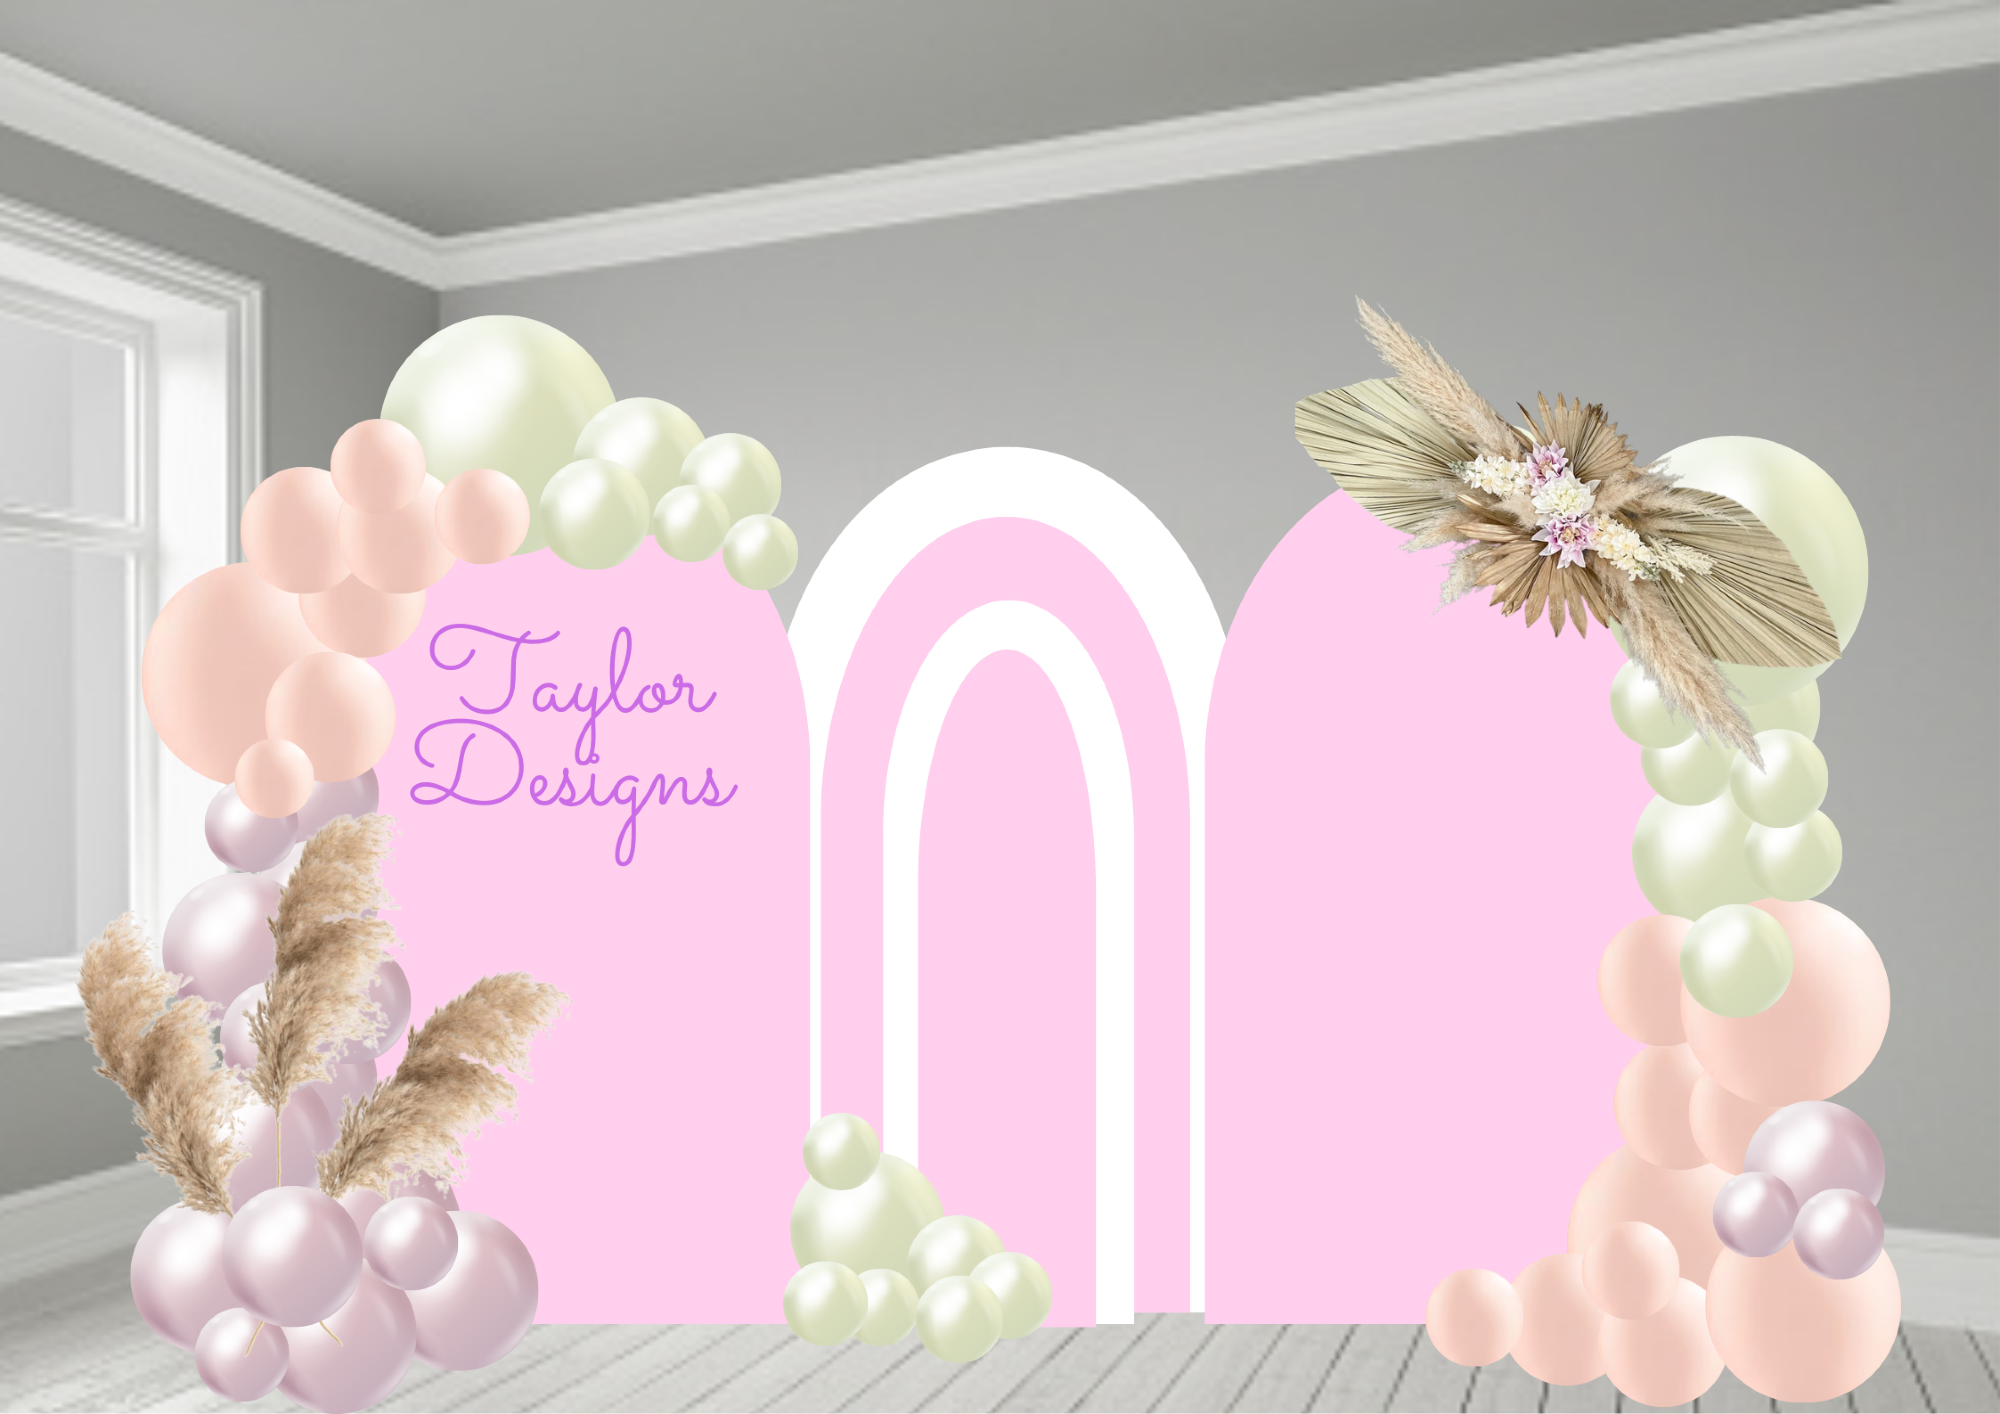 Balloon arch 3 x backdrop with personalisation & flowers.